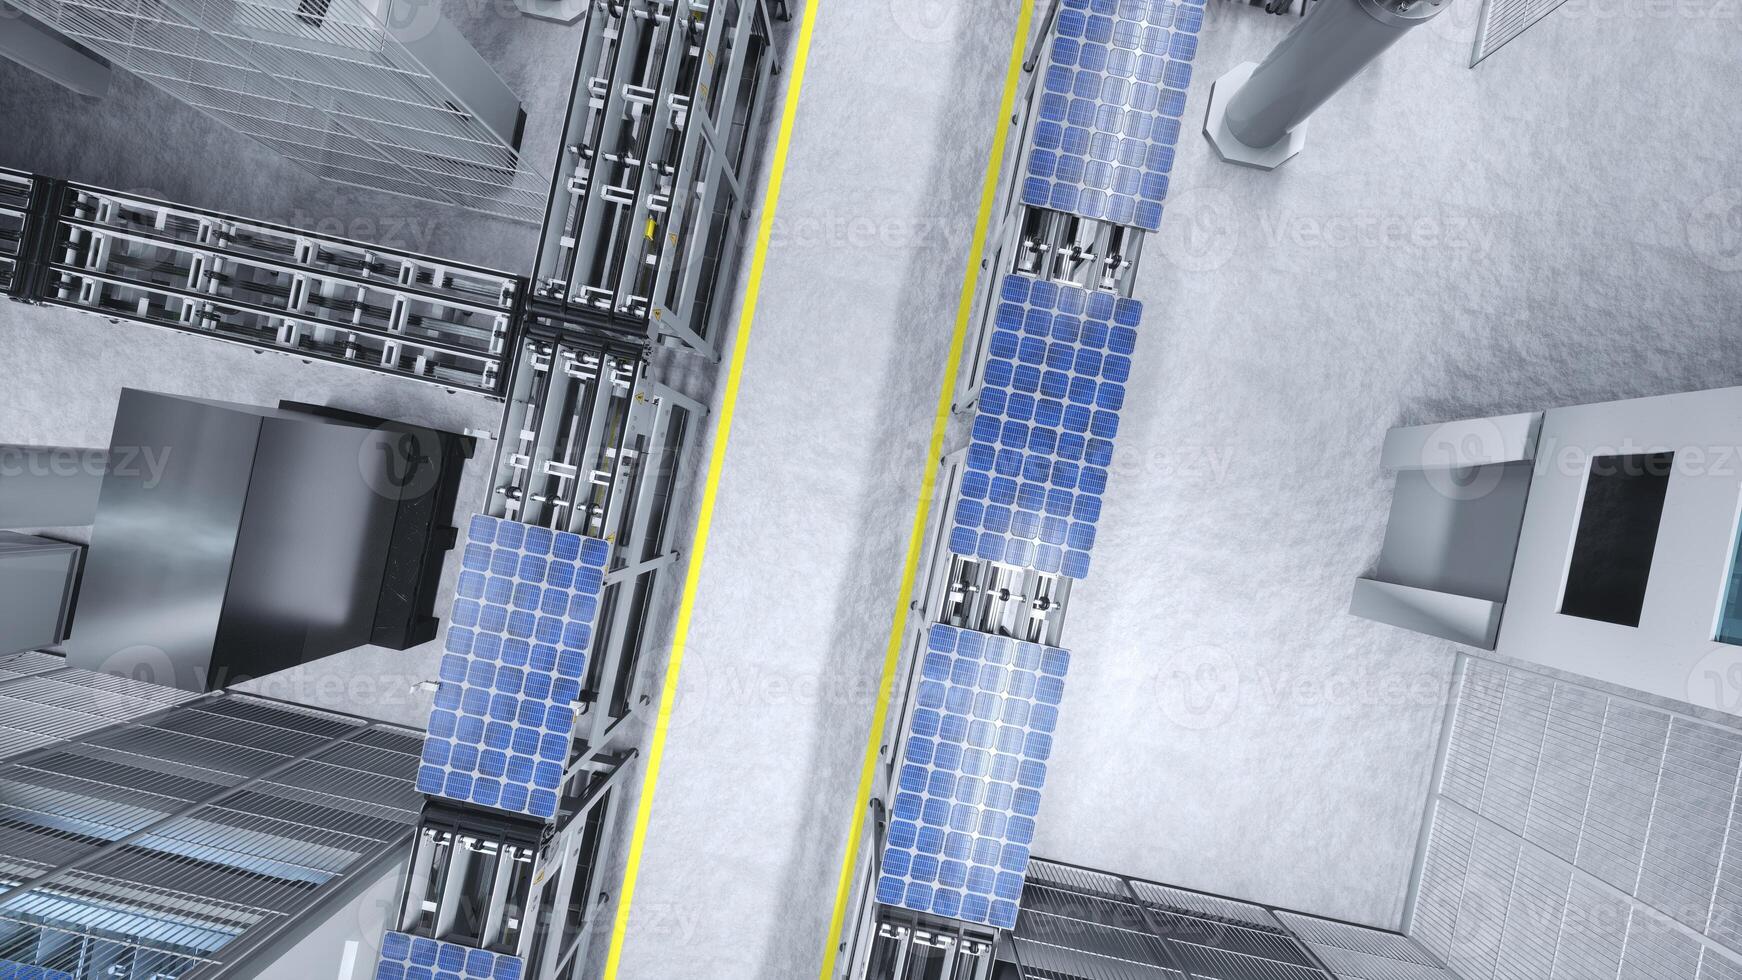 Top down view of solar panels on conveyor belts operated by high tech robot arms in modern sustainable factory. Aerial shot of PV cells in industrial automated facility, 3D rendering photo